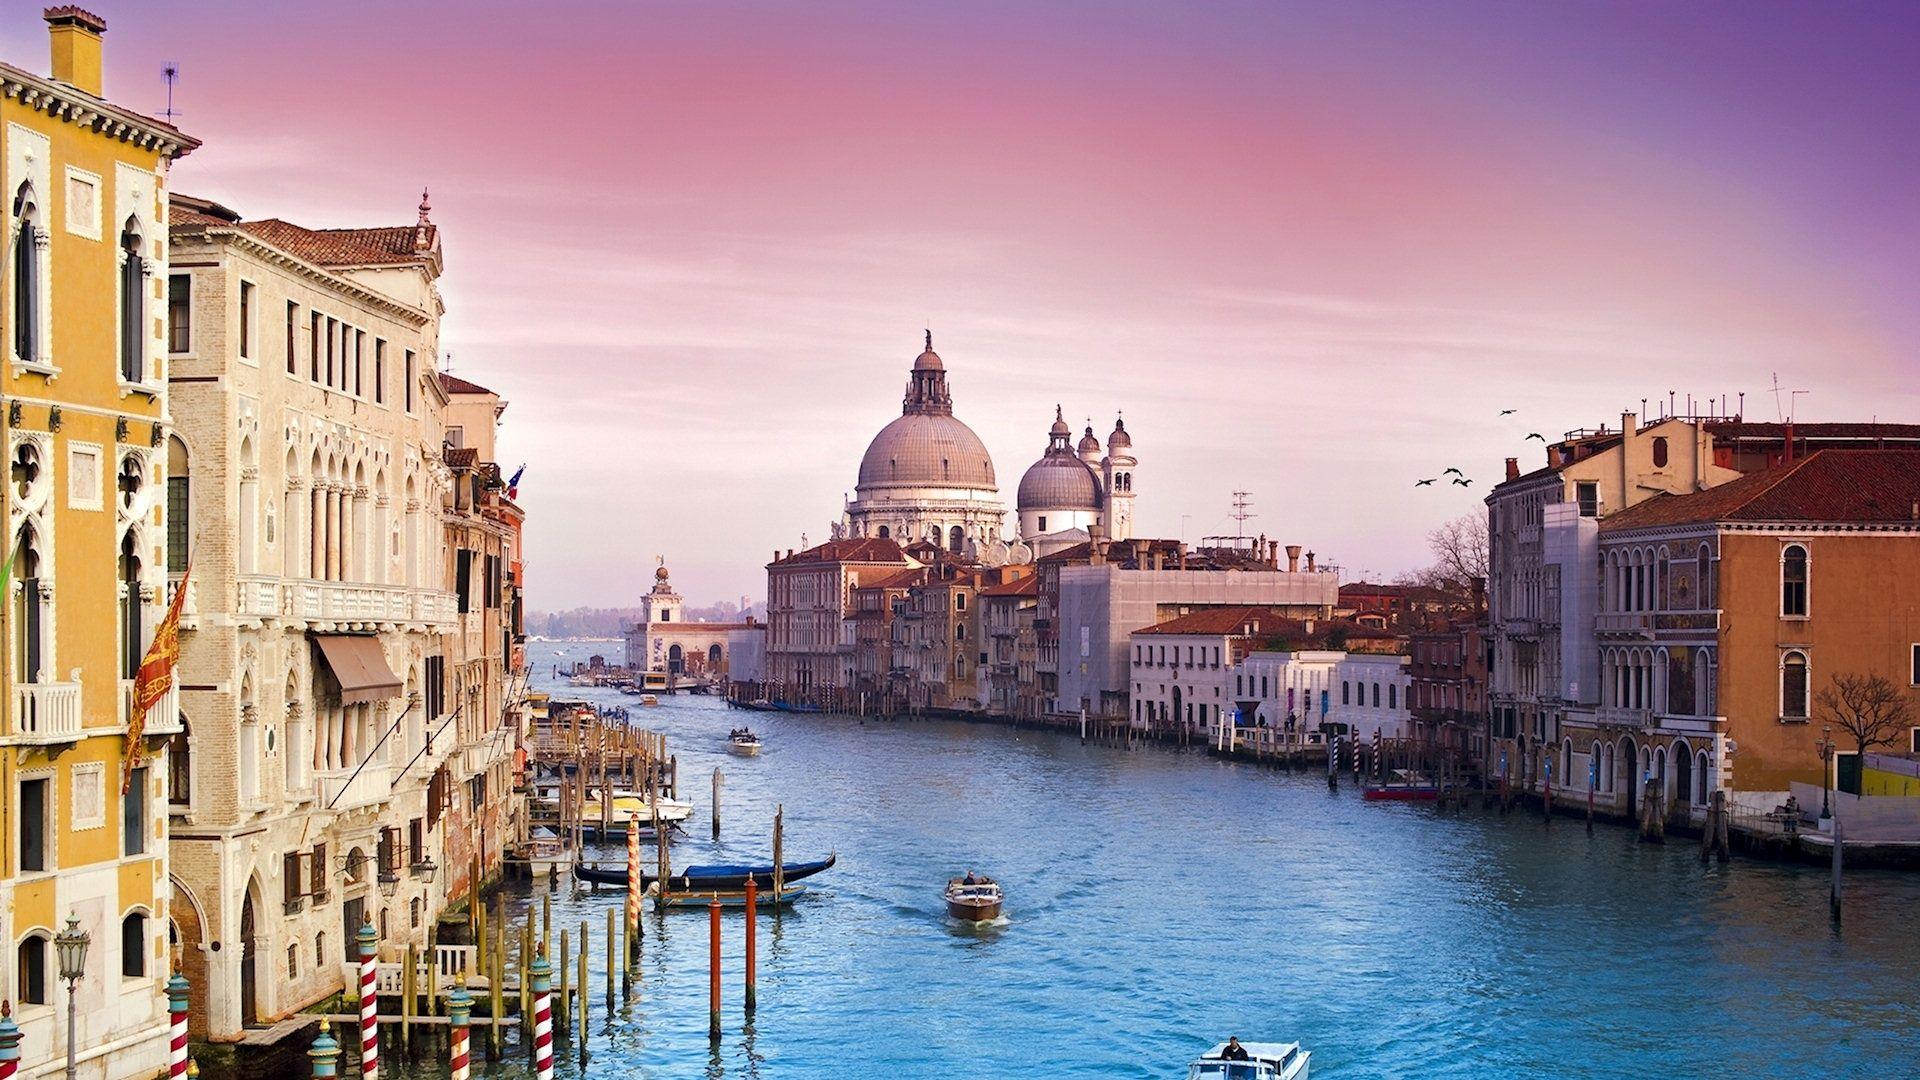 Venice (The Water City) HD Wallpaper Free Download